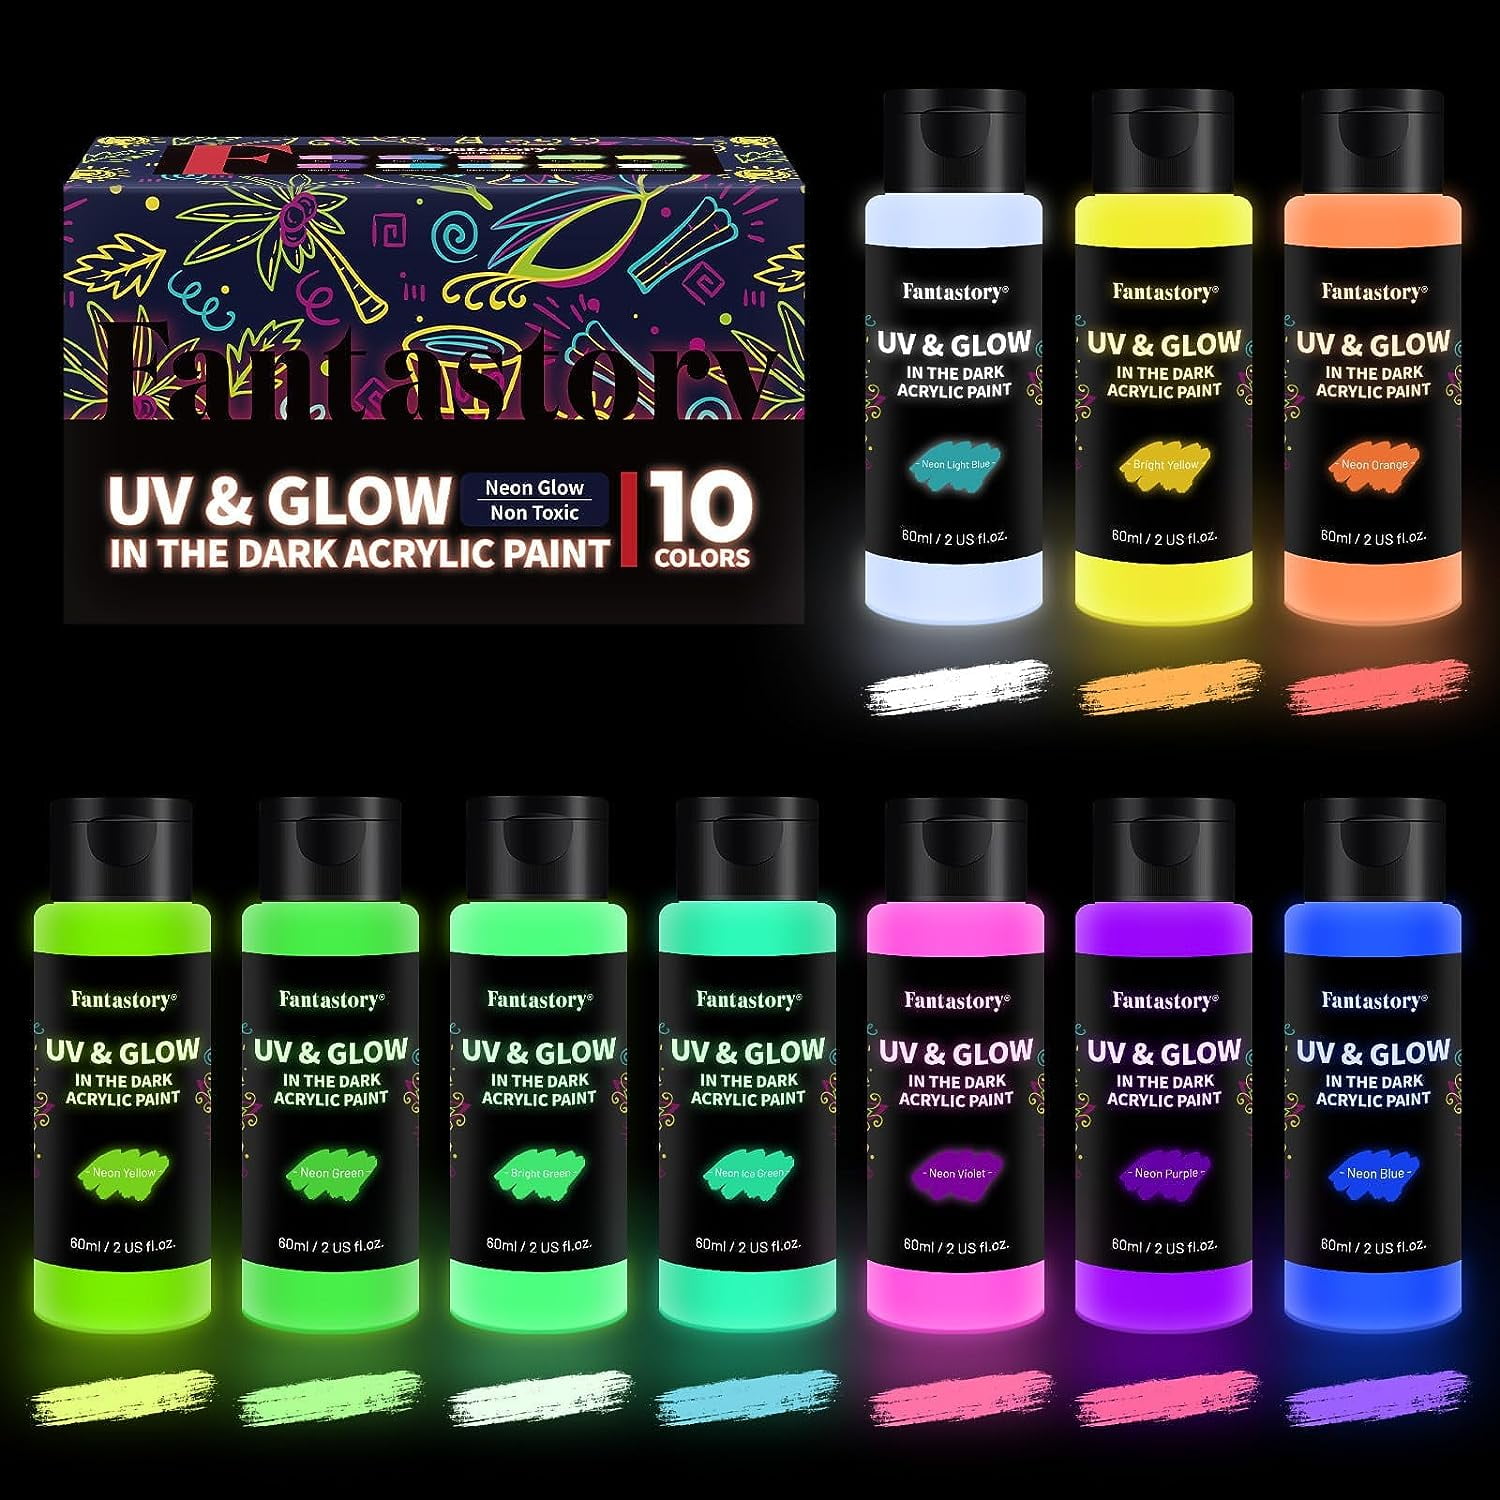  Washable Glow-in-the-Dark Halloween Decoration Spray Paint 3  oz. : Arts, Crafts & Sewing